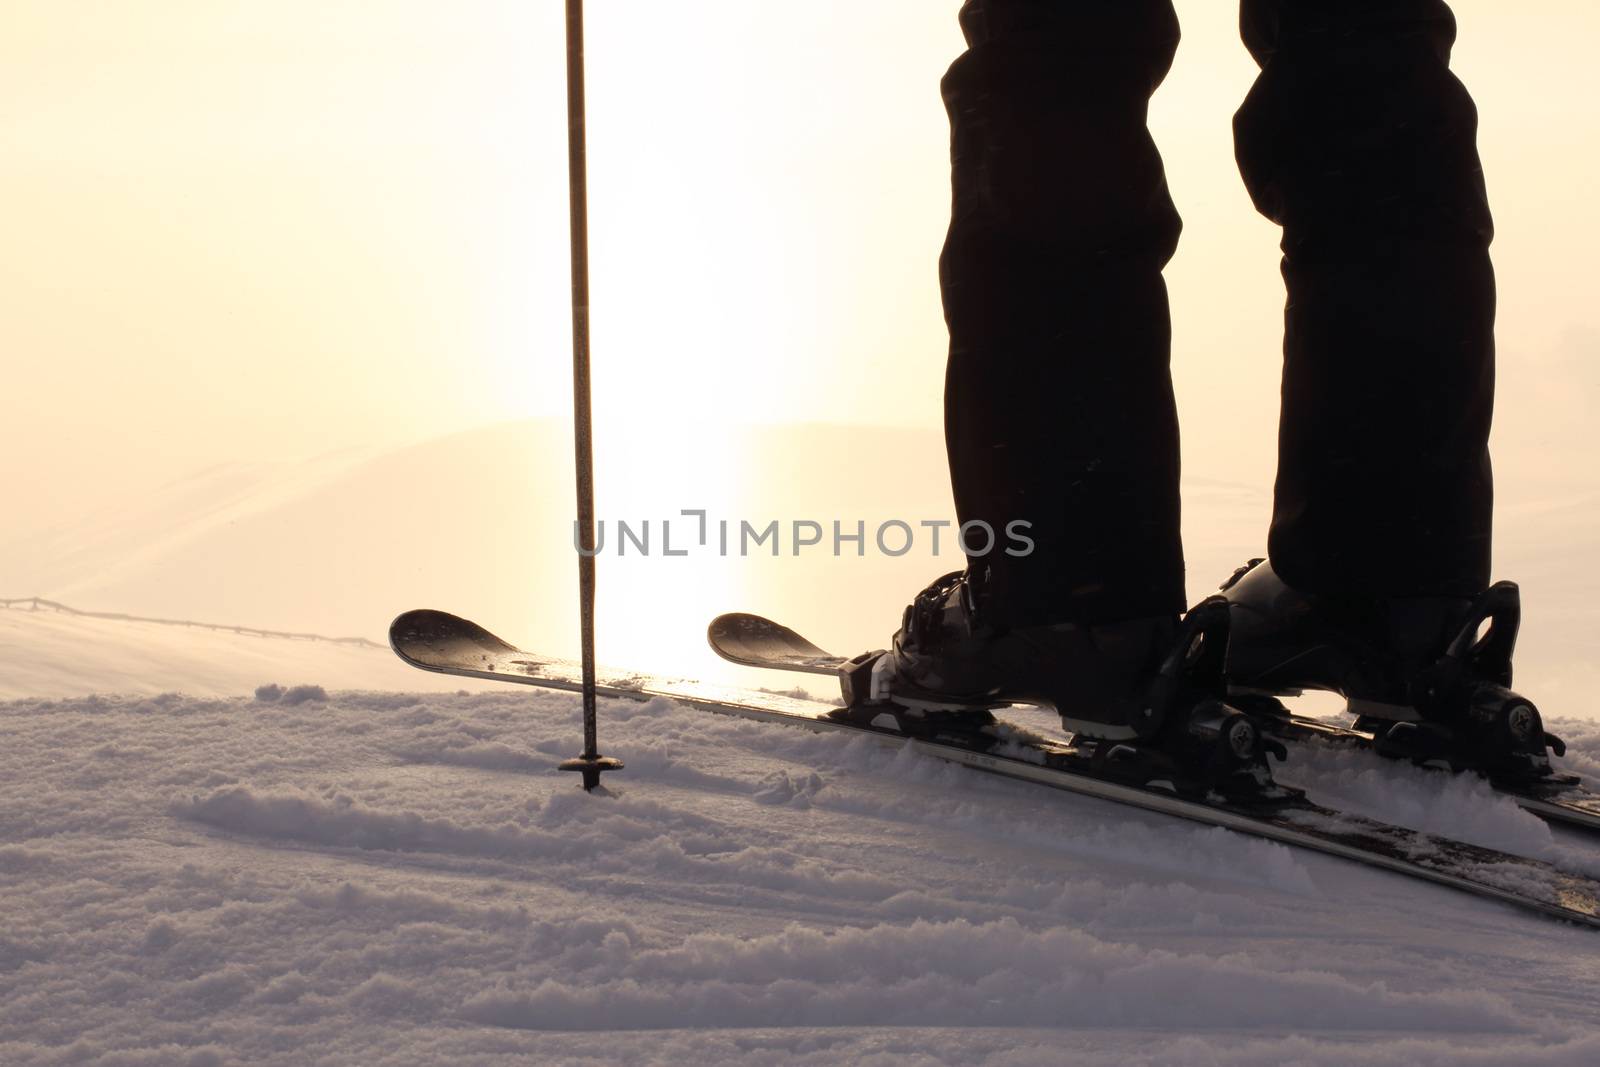 Skier on ski slope with mountains in background